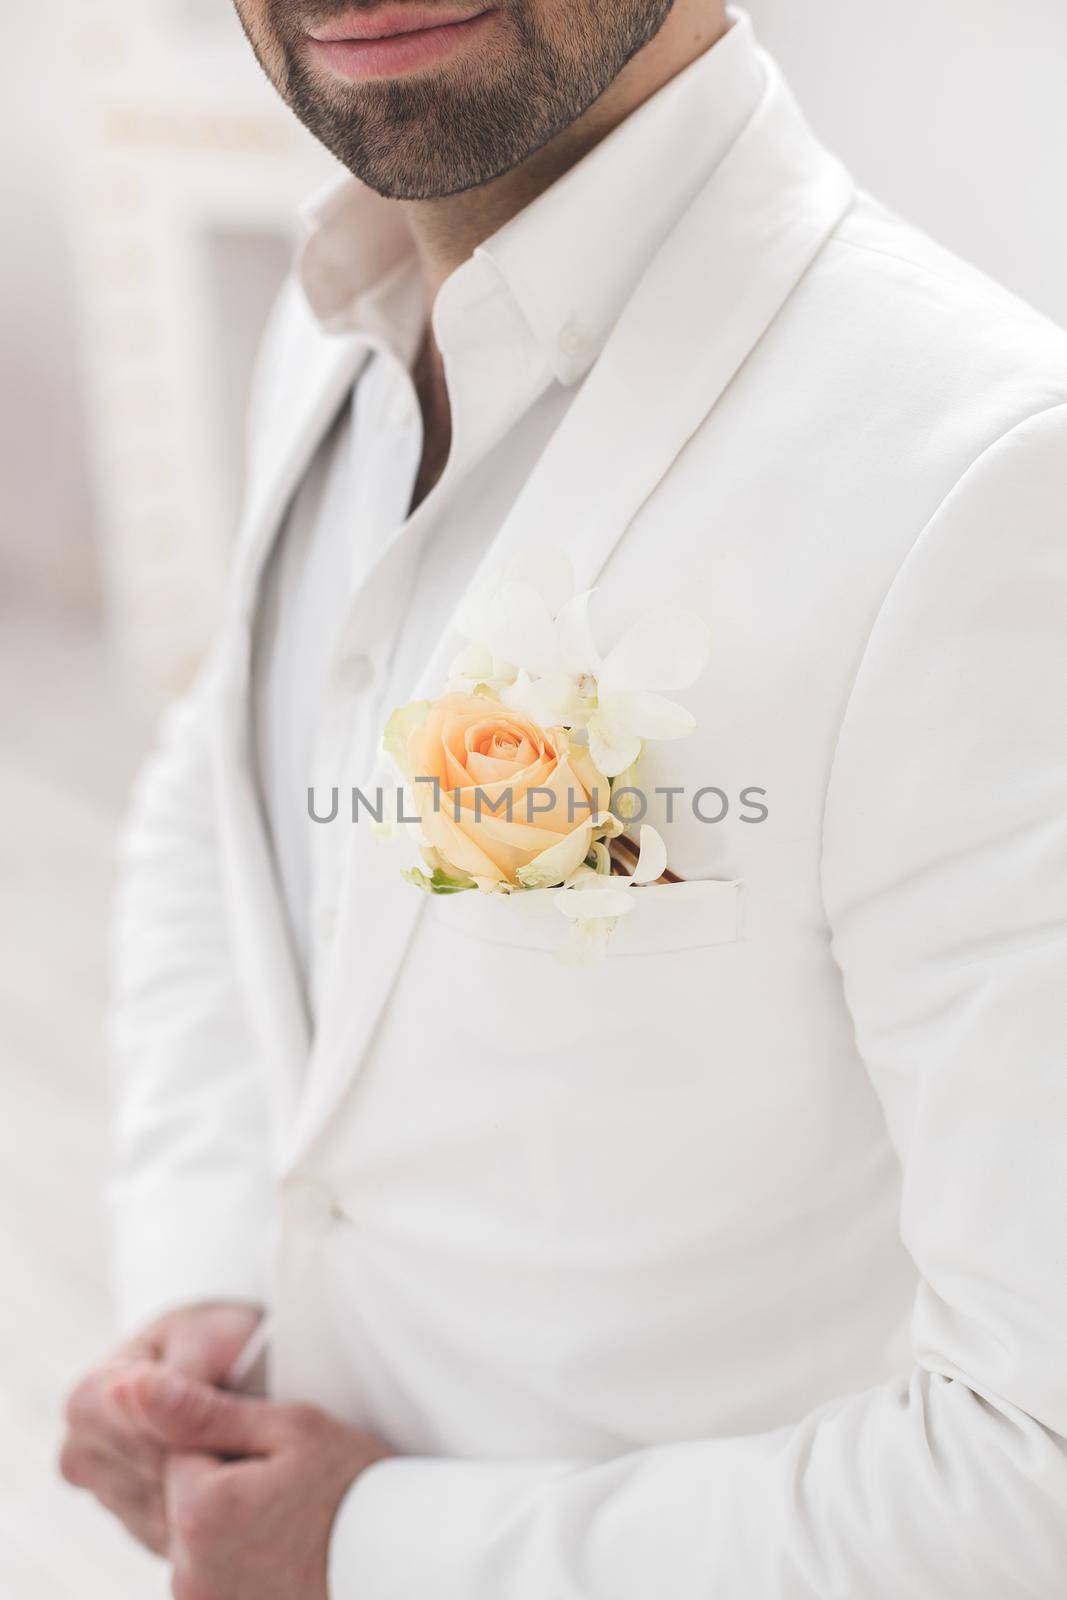 Elegant young handsome man with a beard in a white classic suit. by StudioPeace